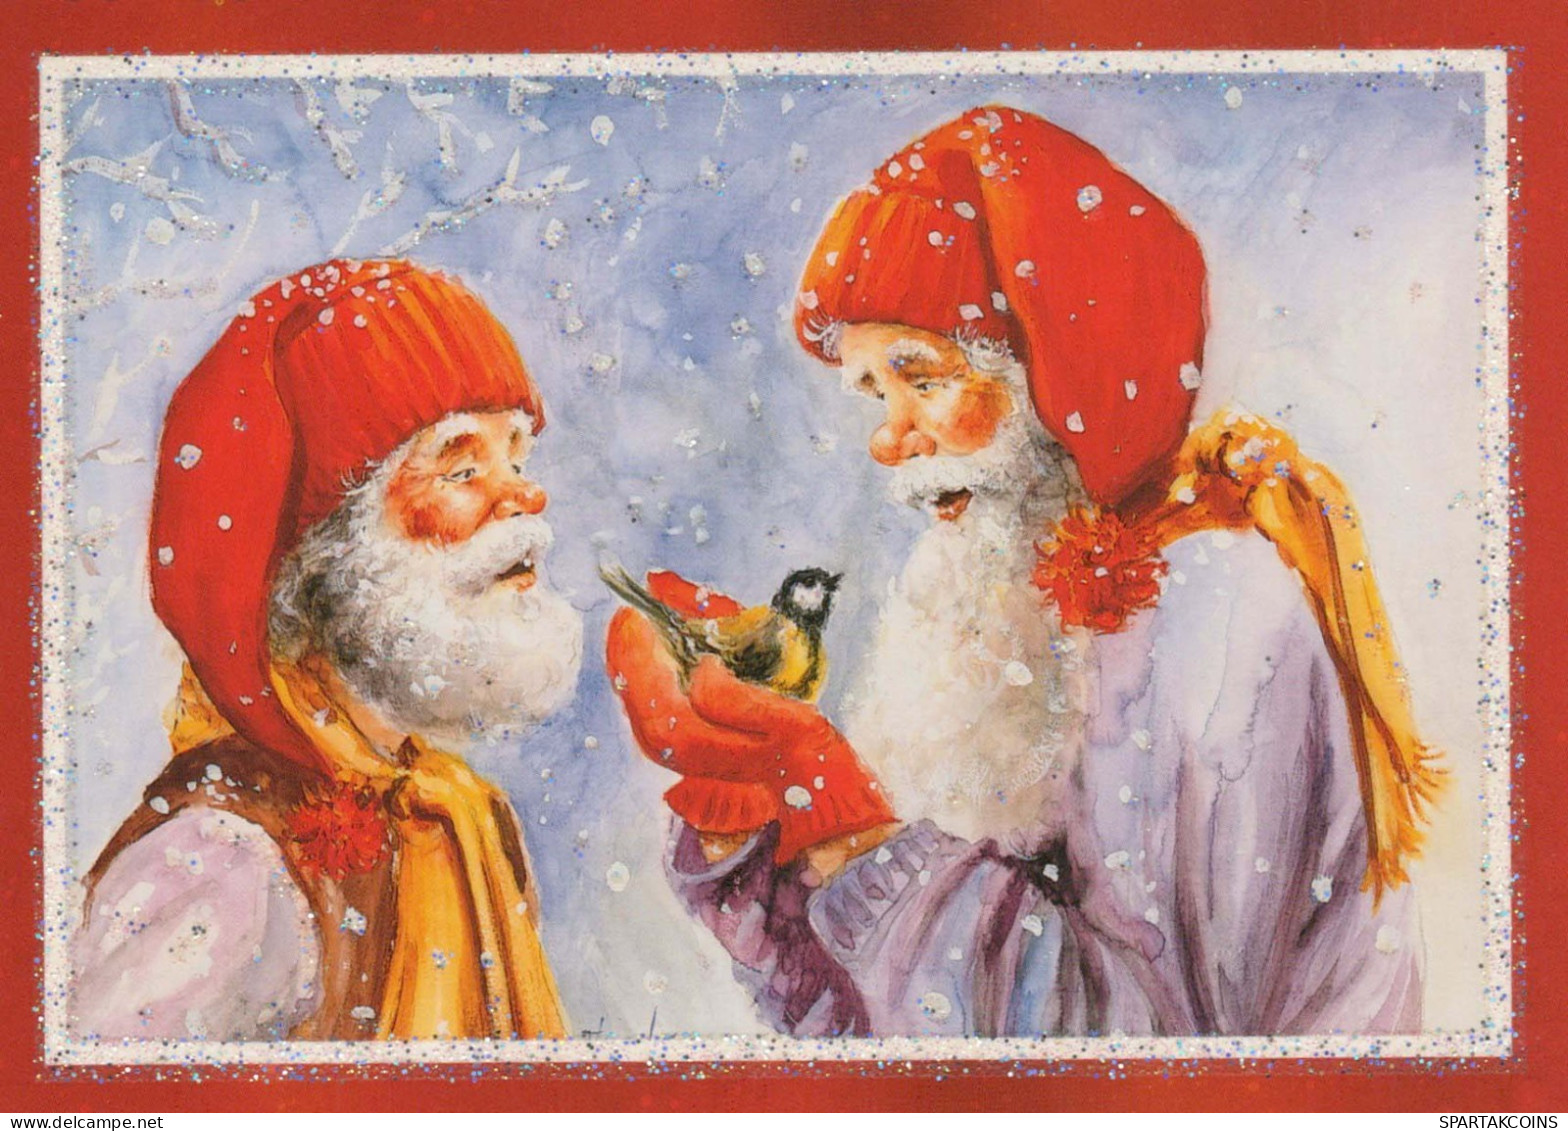 BABBO NATALE Buon Anno Natale Vintage Cartolina CPSM #PBL085.IT - Kerstman